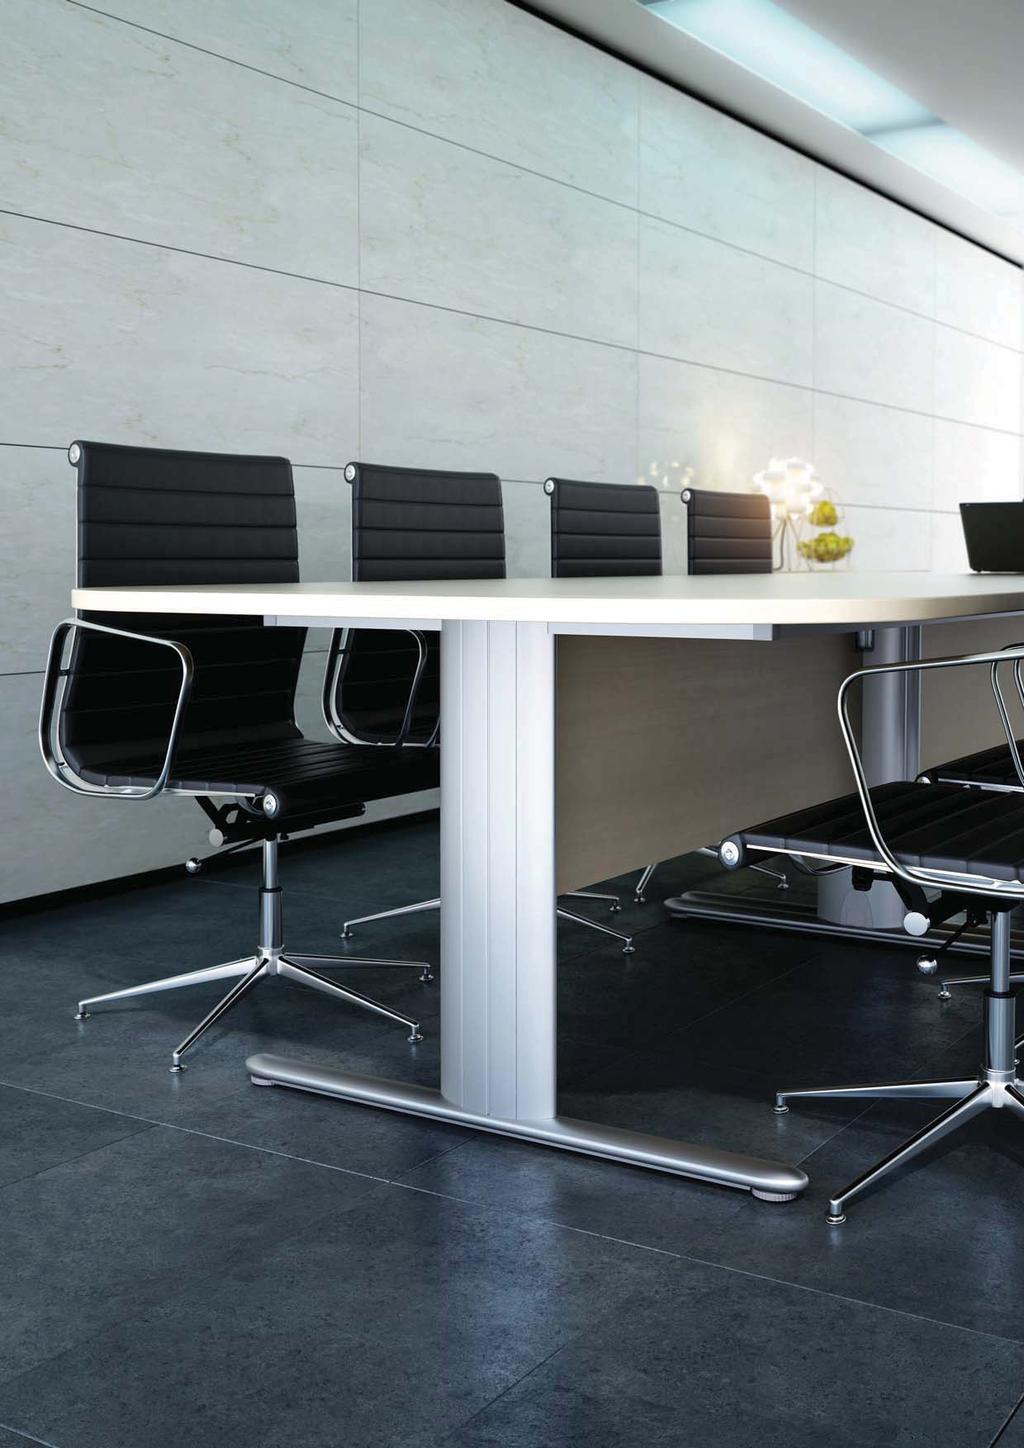 This modern design I frame table with anti-glare melamine will provide the comfort and shape to enhance productivity.